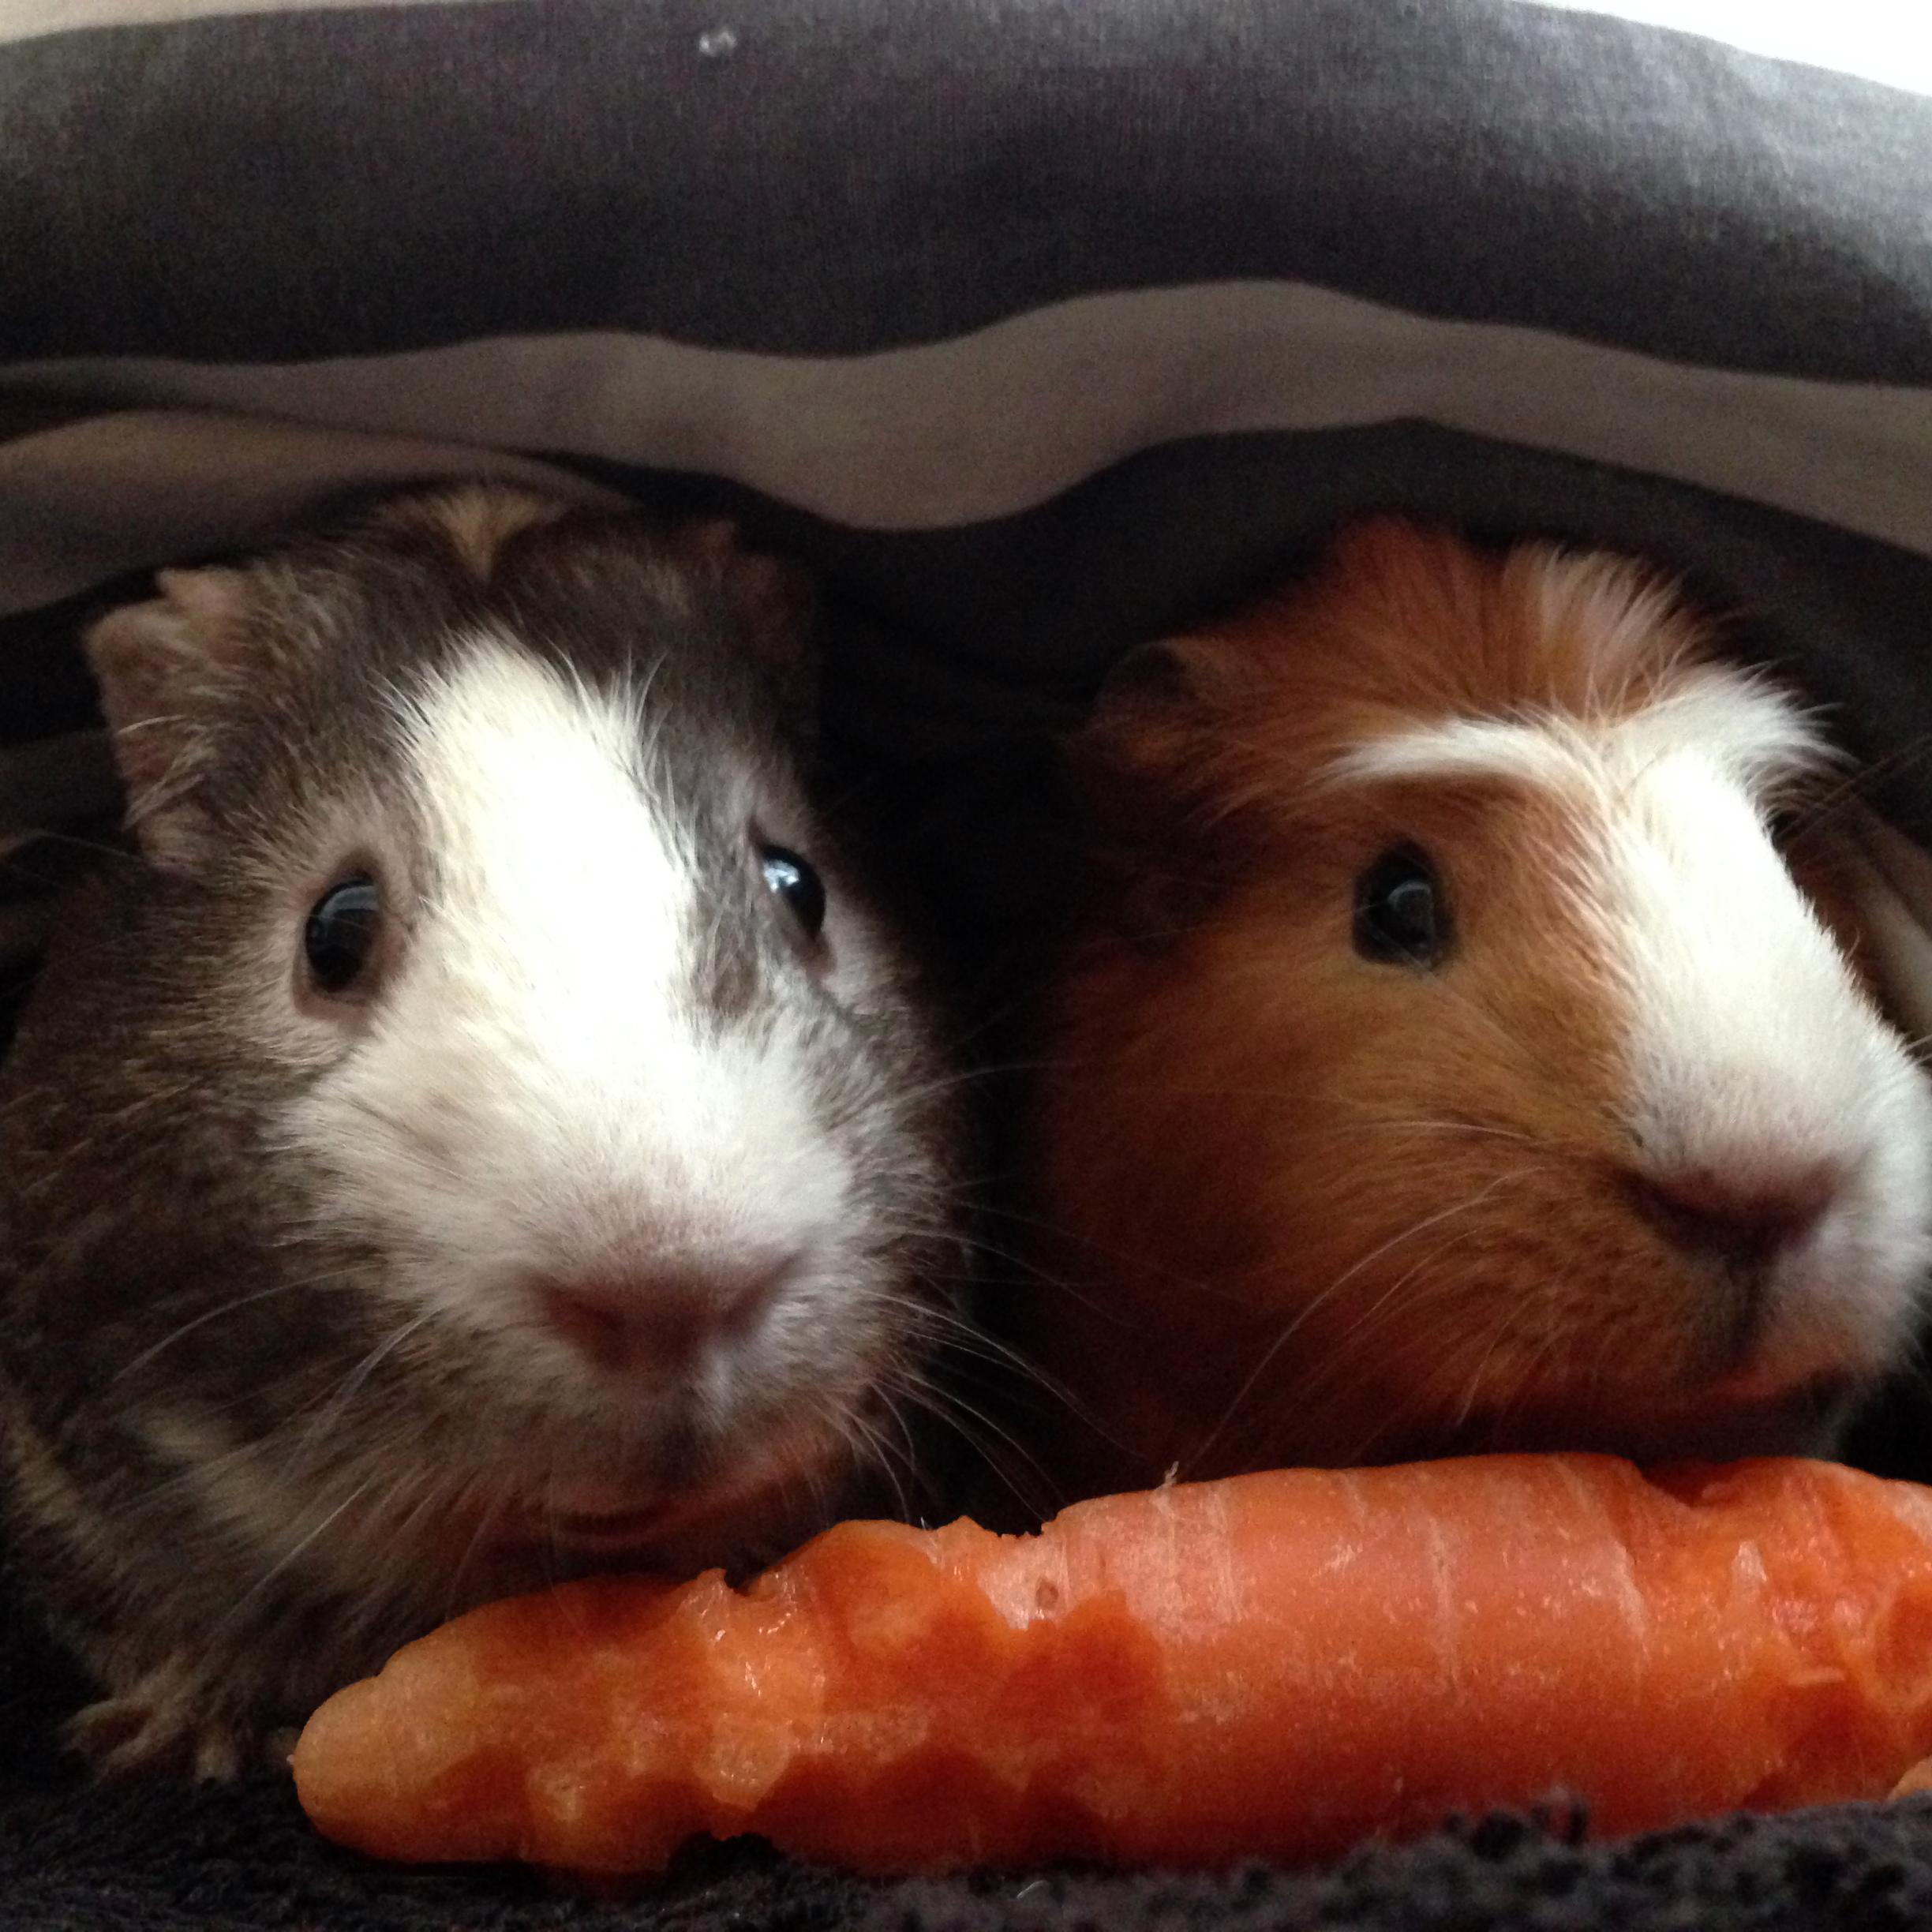 Calling all humans, watch our videos, look at and share our pictures and generally obey all piggie requests. Follow back. @GUINEAPIGSrule